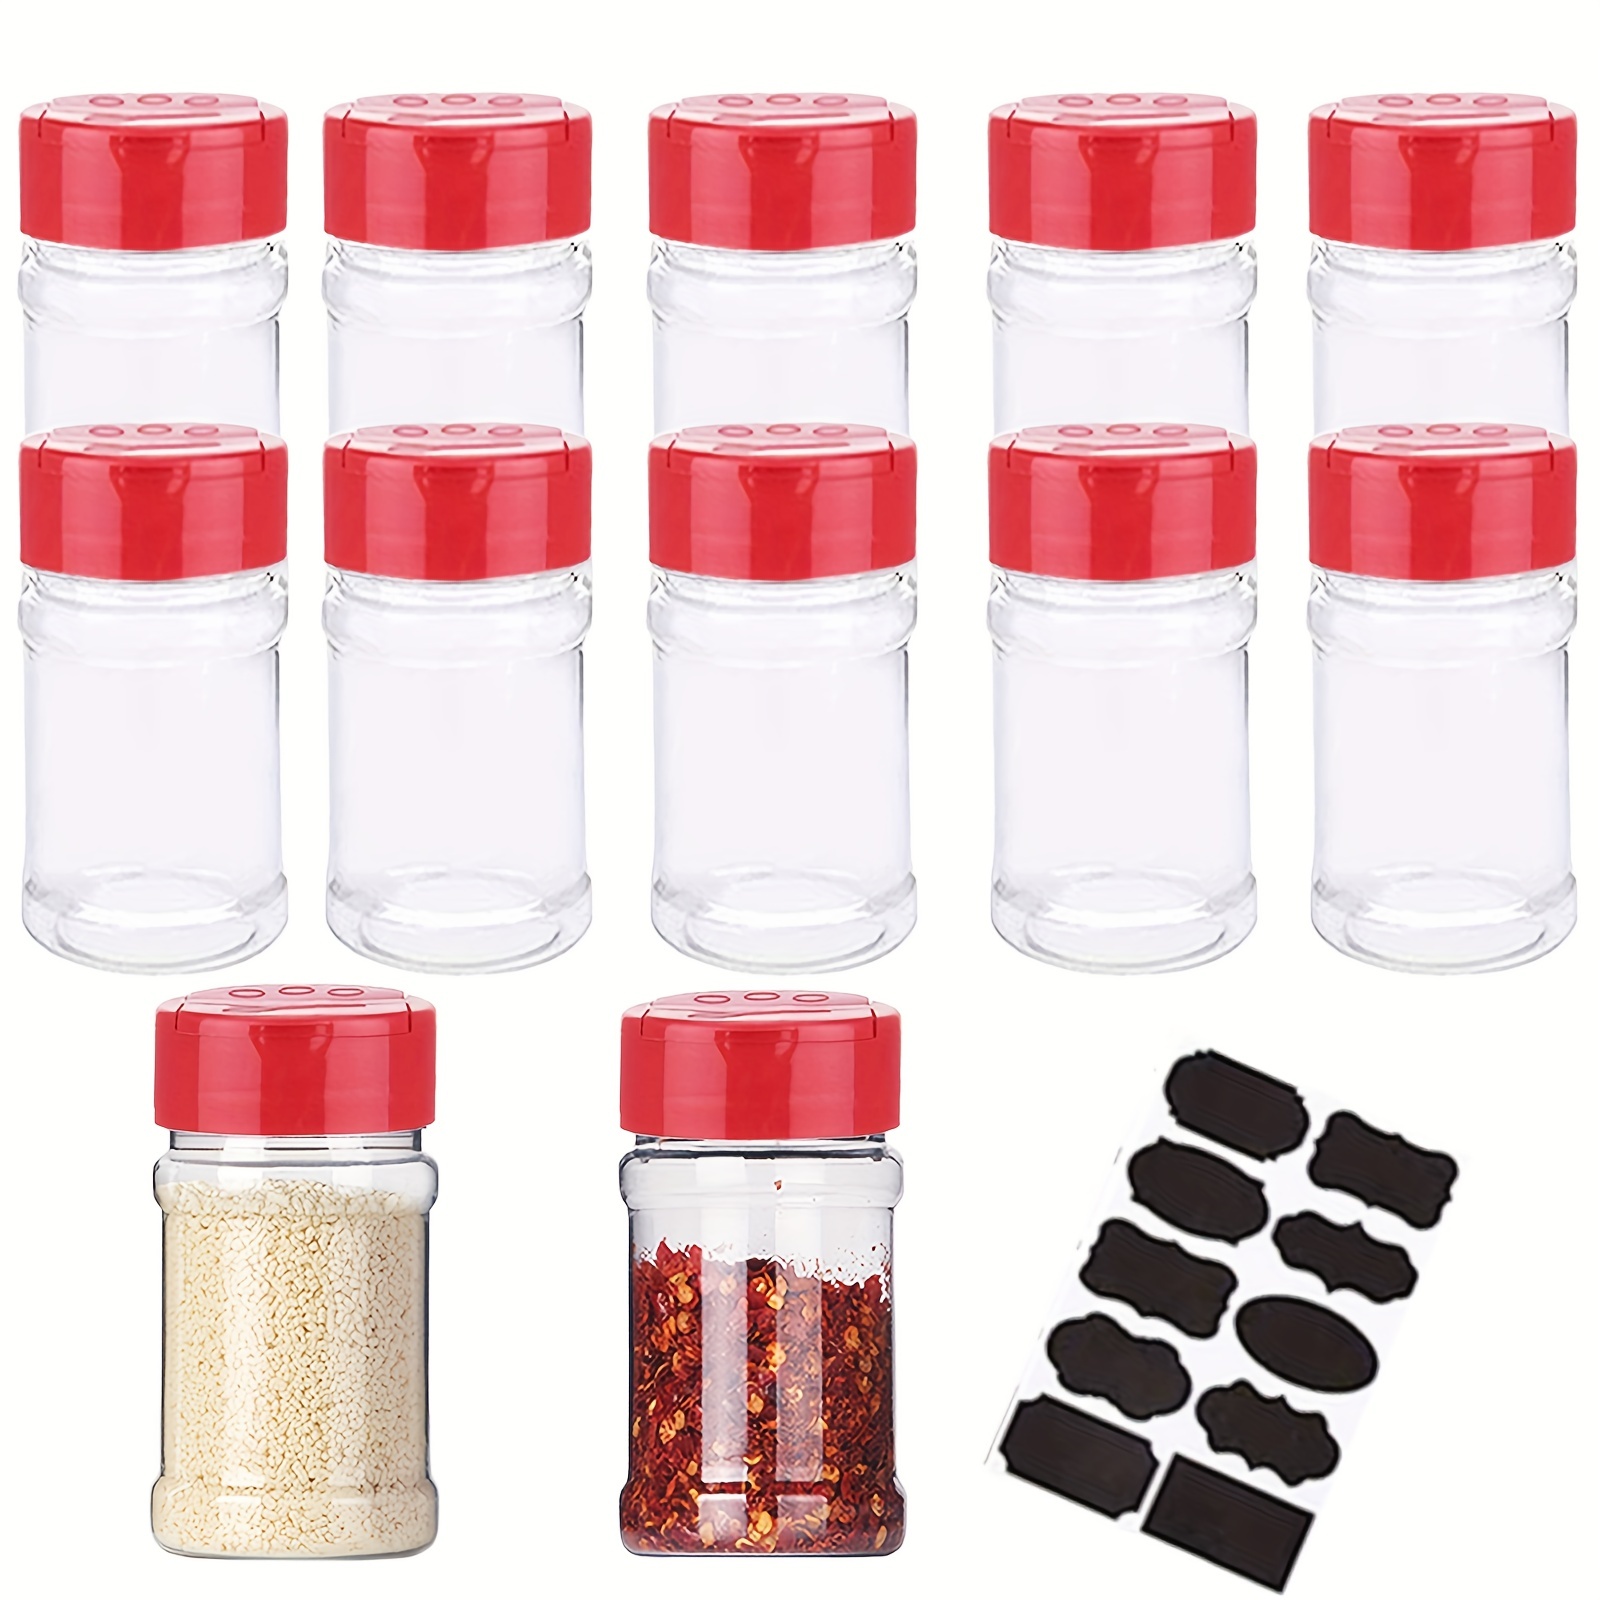 Plastic Spice Jars, Bottles, & Containers